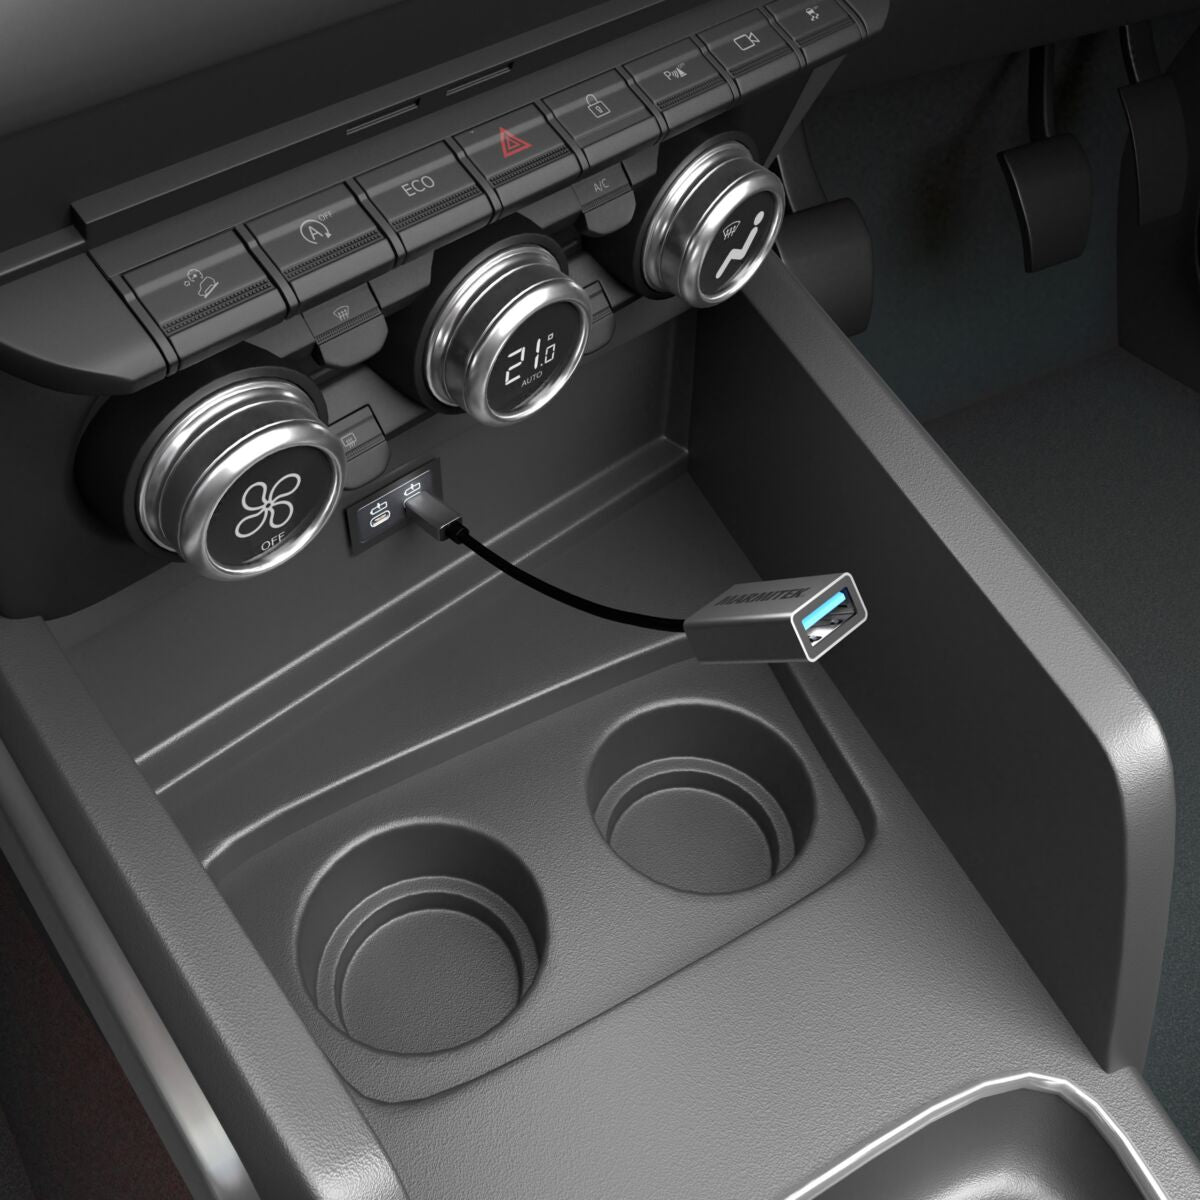 USB-C to USB-A adapter - Ambiance Image of an USB-C to USB-A adapter in a car | Marmitek